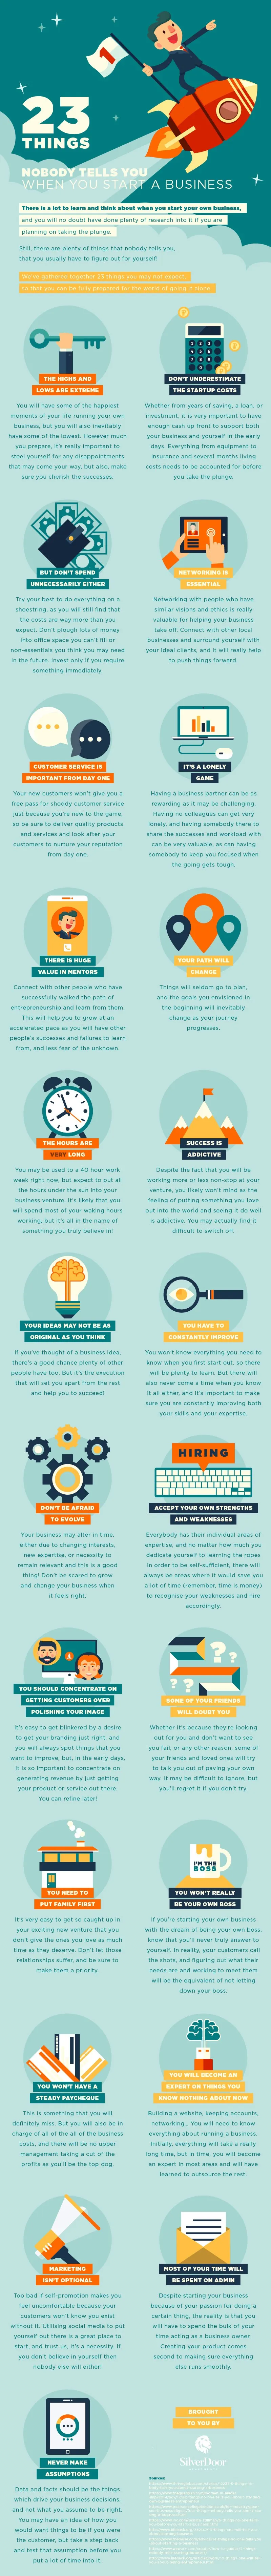 23 Things Nobody Tells You When You Start A Business - #Infographic